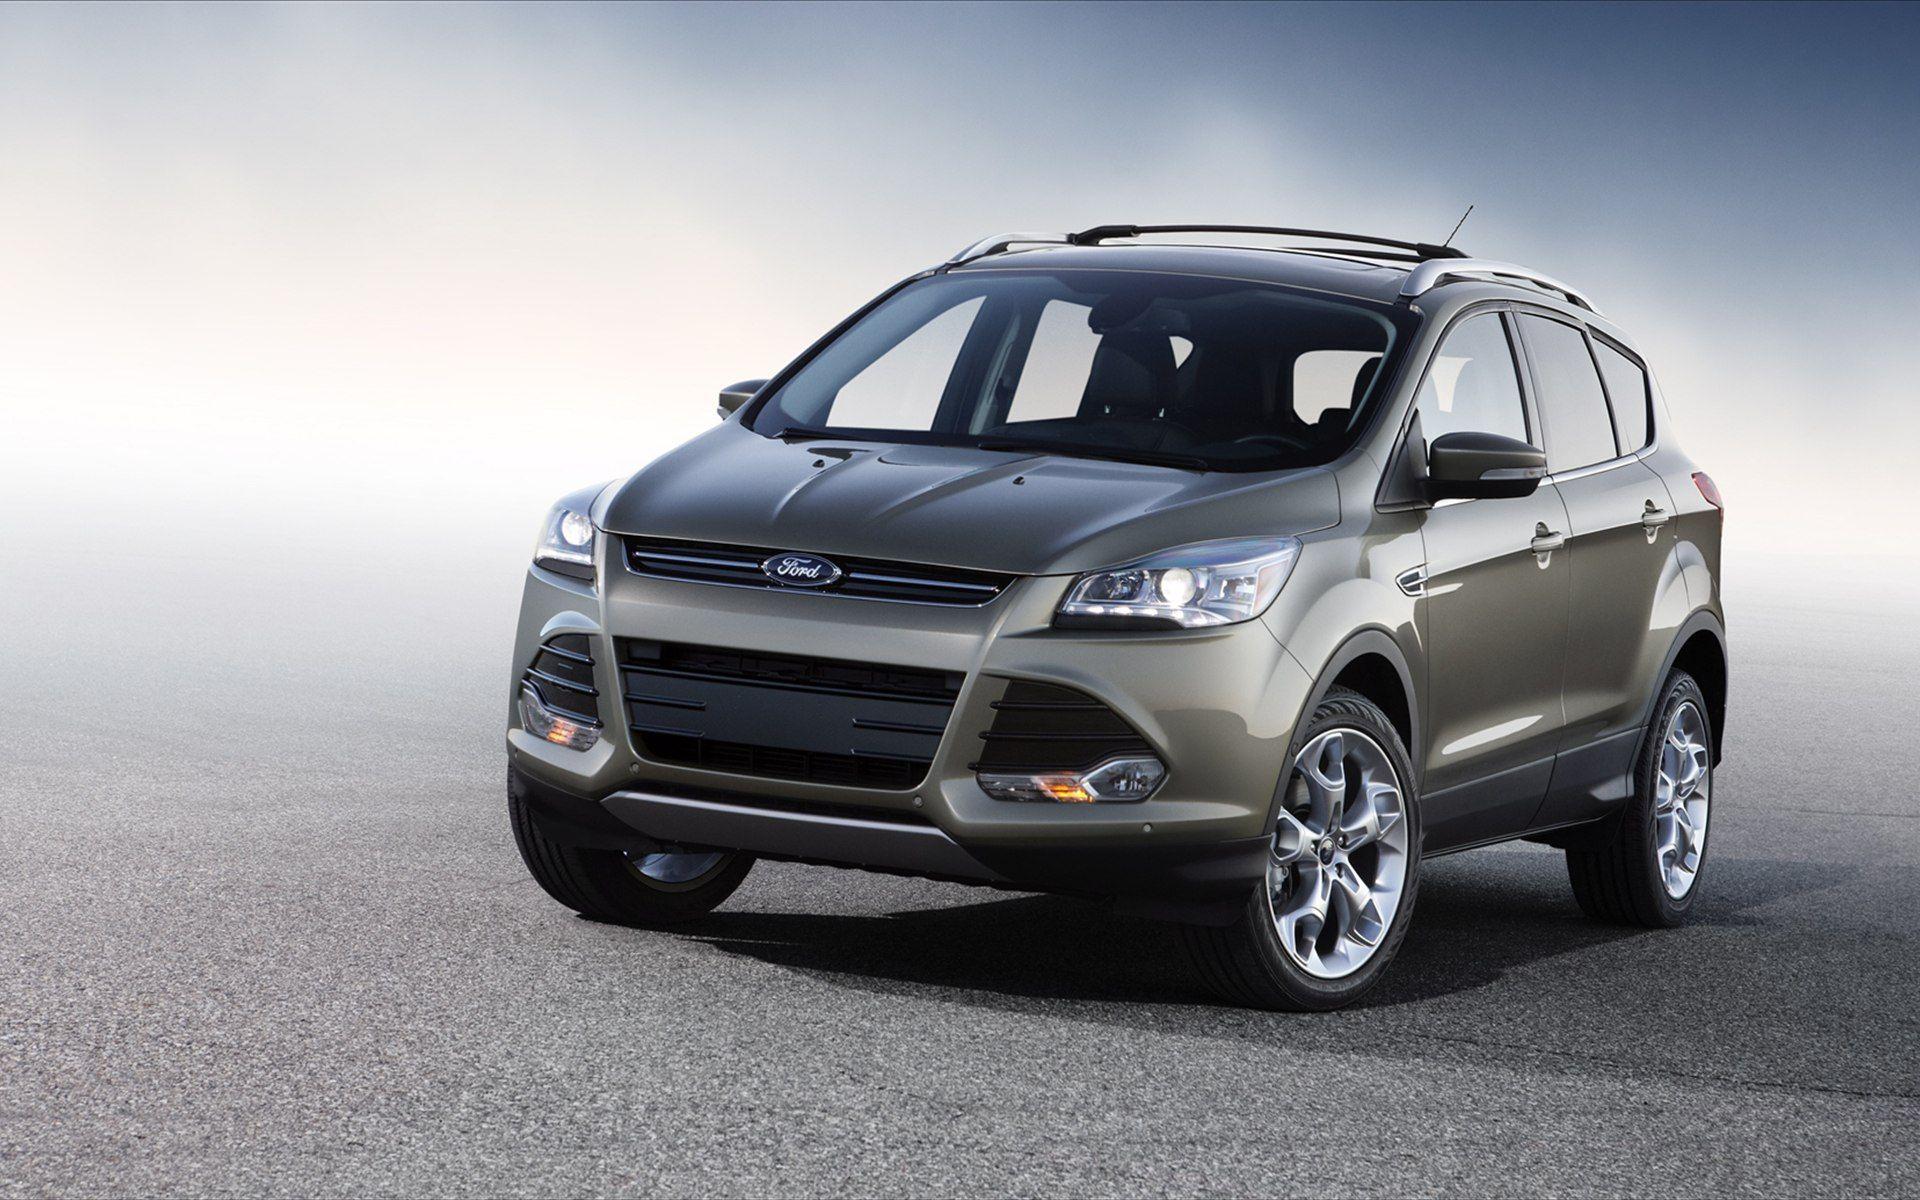 Ford Escape Wallpapers Top Free Ford Escape Backgrounds Wallpaperaccess